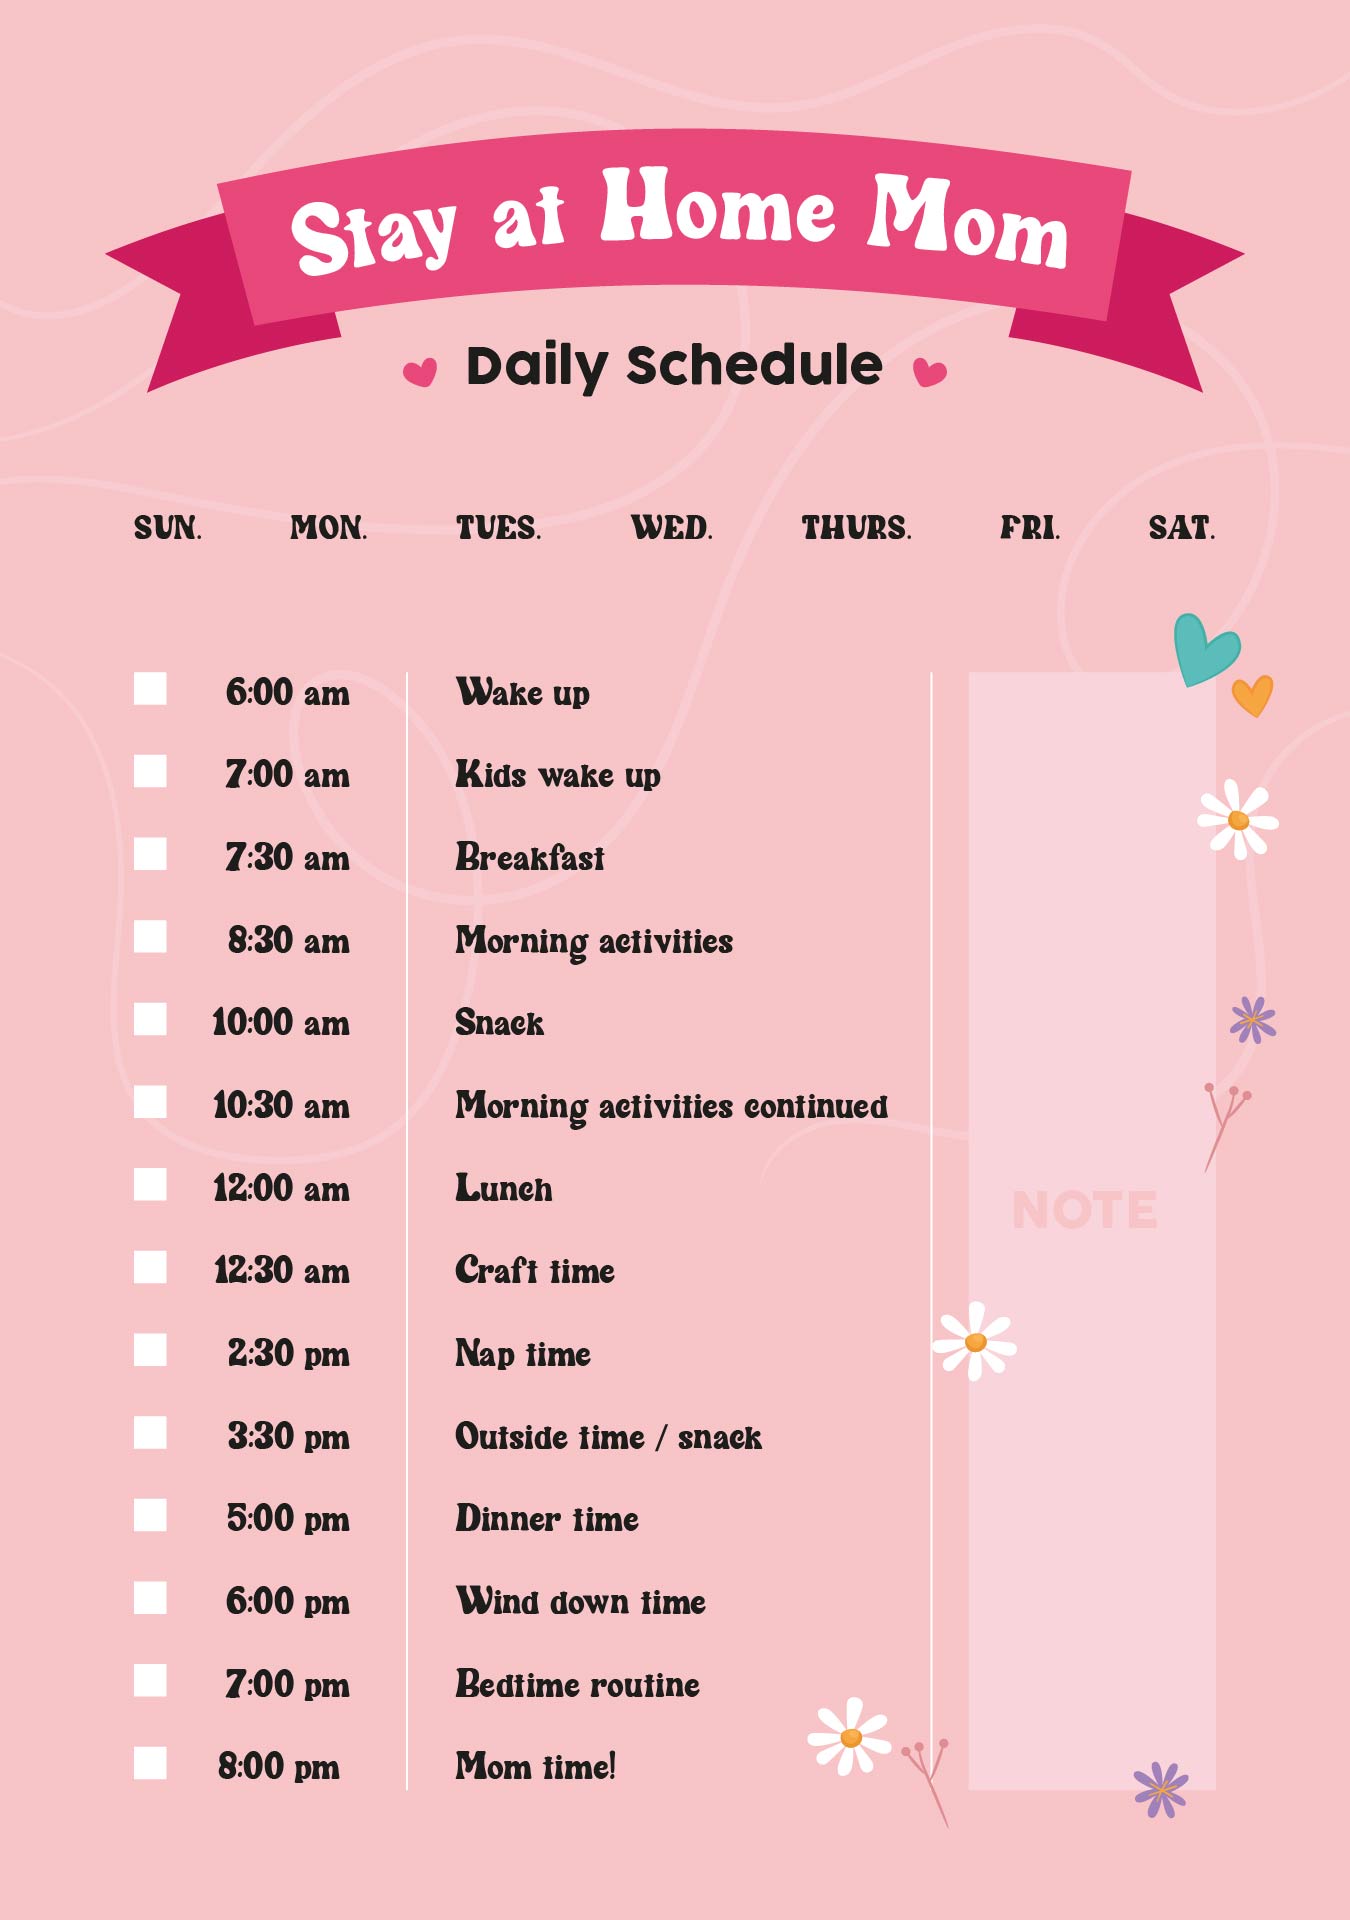 Stay at Home Mom Daily Schedule